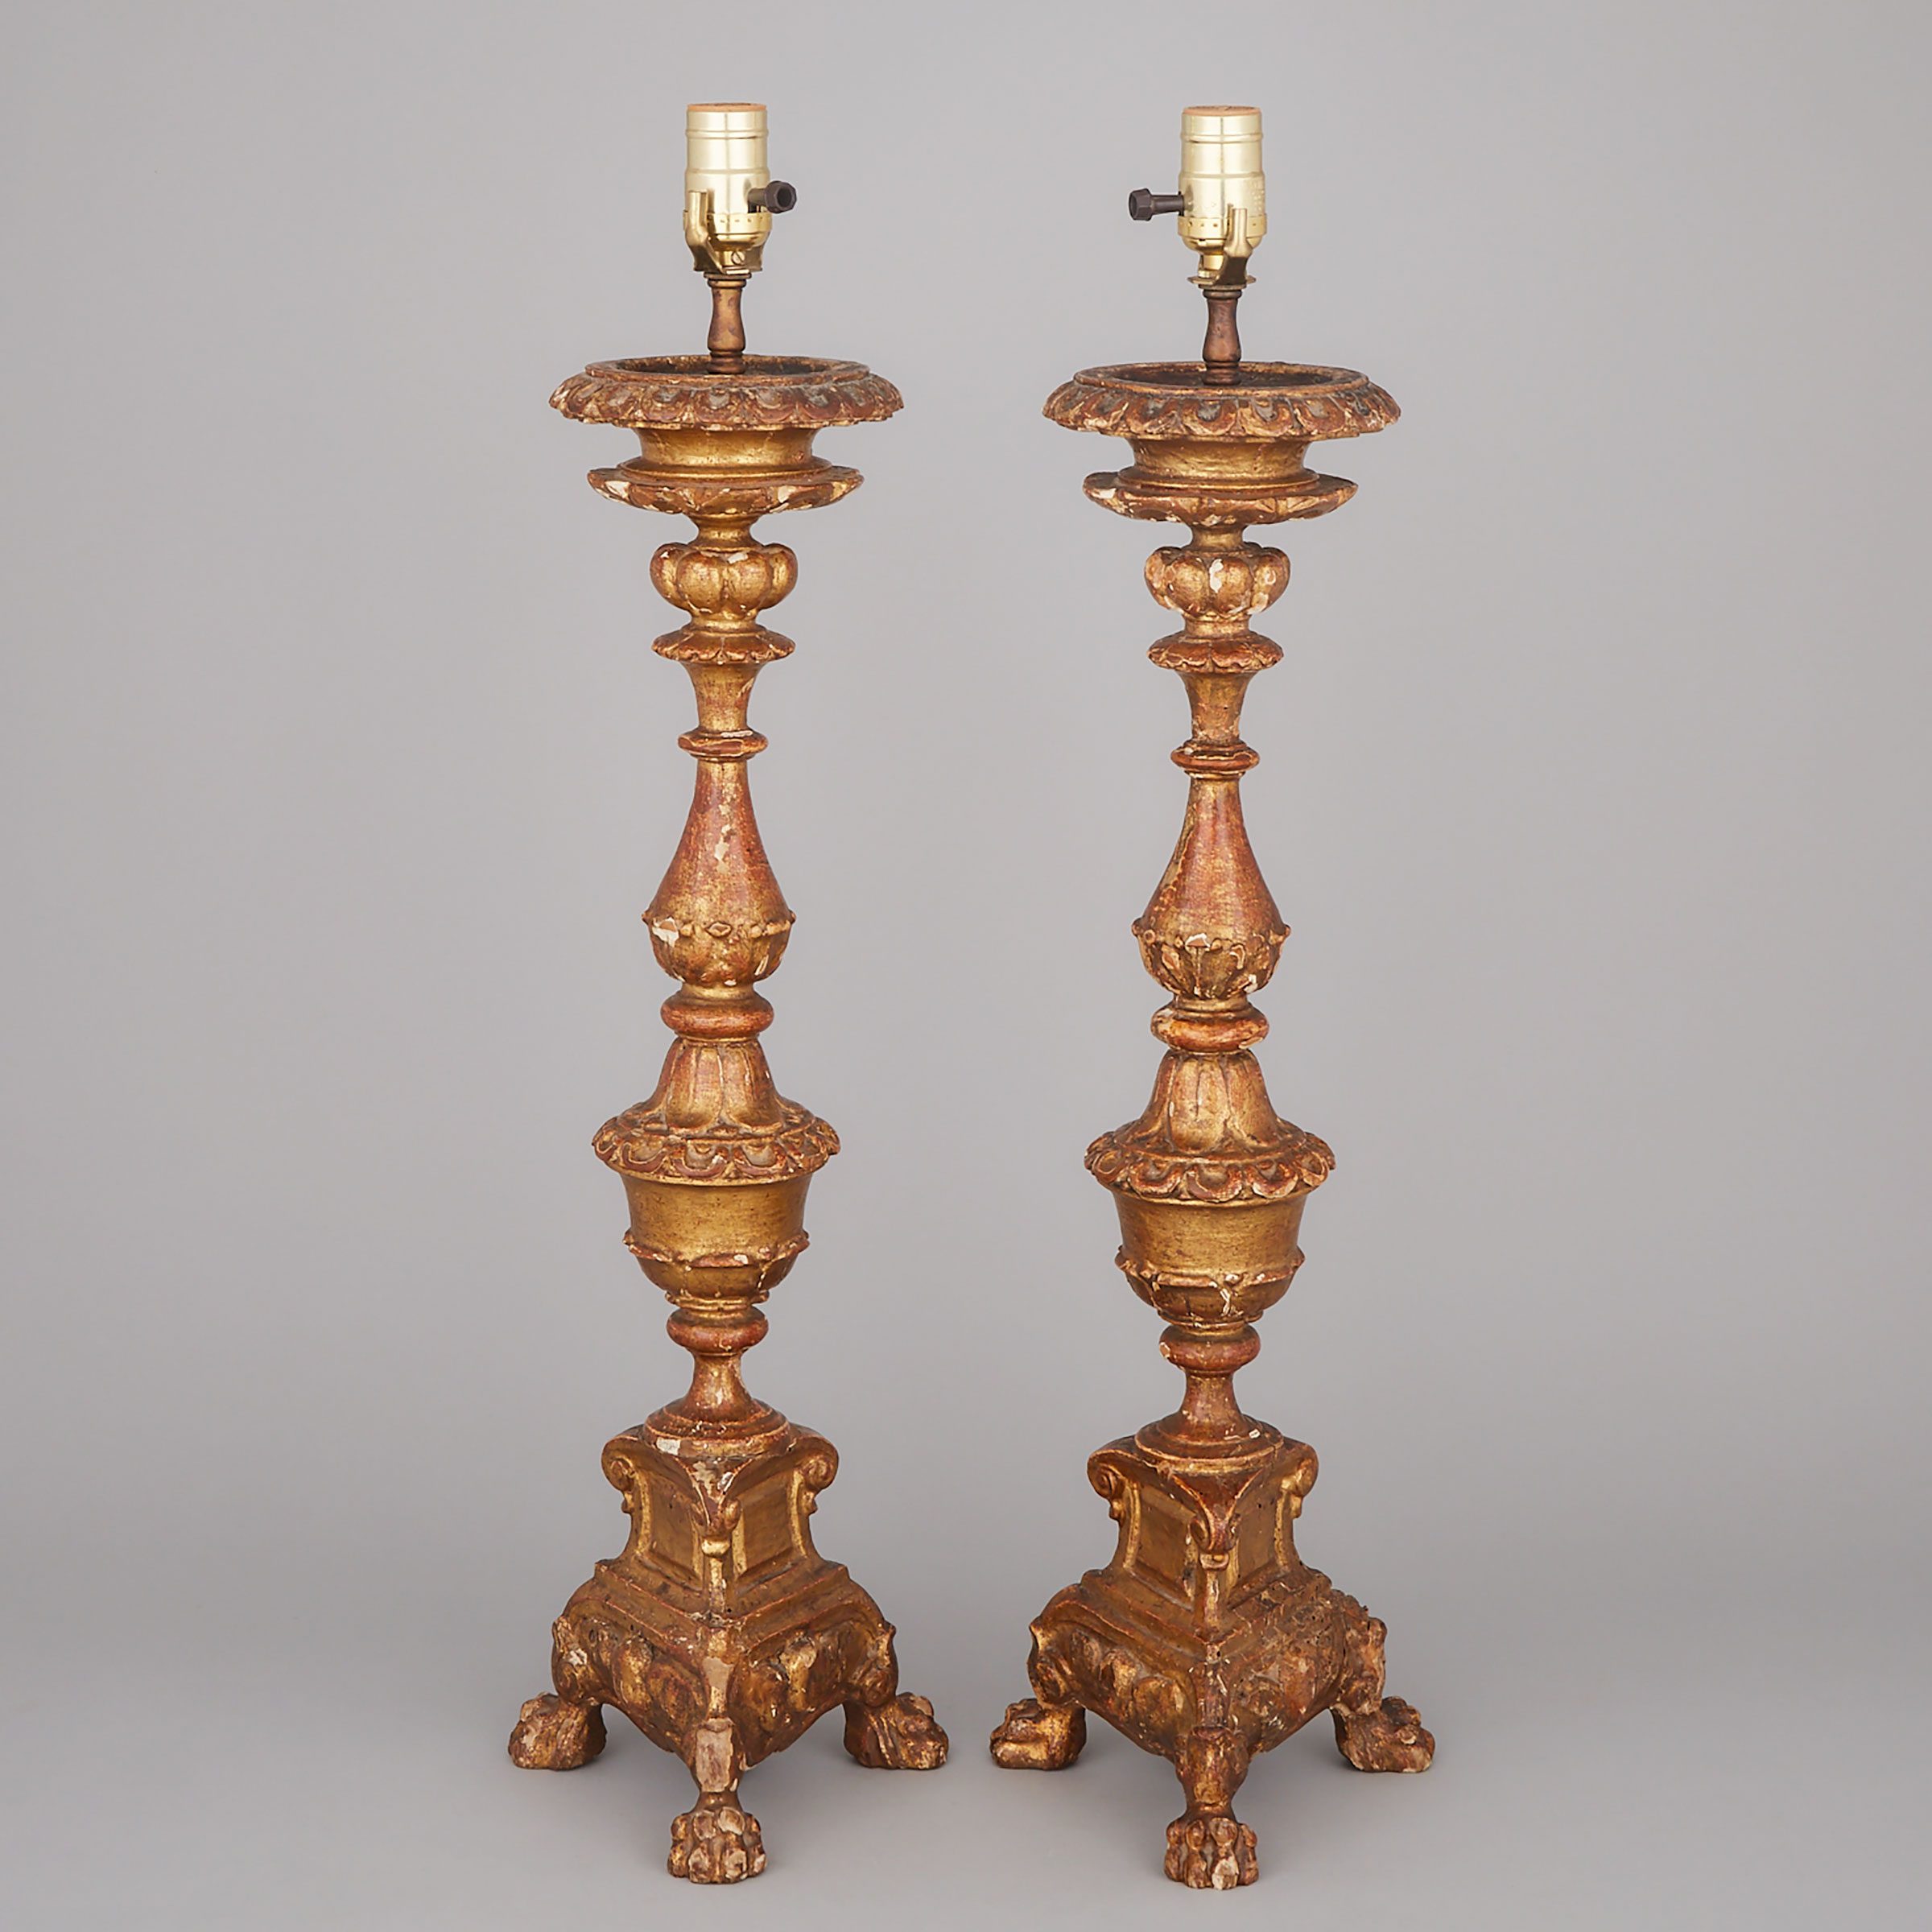 Pair of Italian Baroque Style Gilt Wood Pricket Form Table Lamps, 19th century